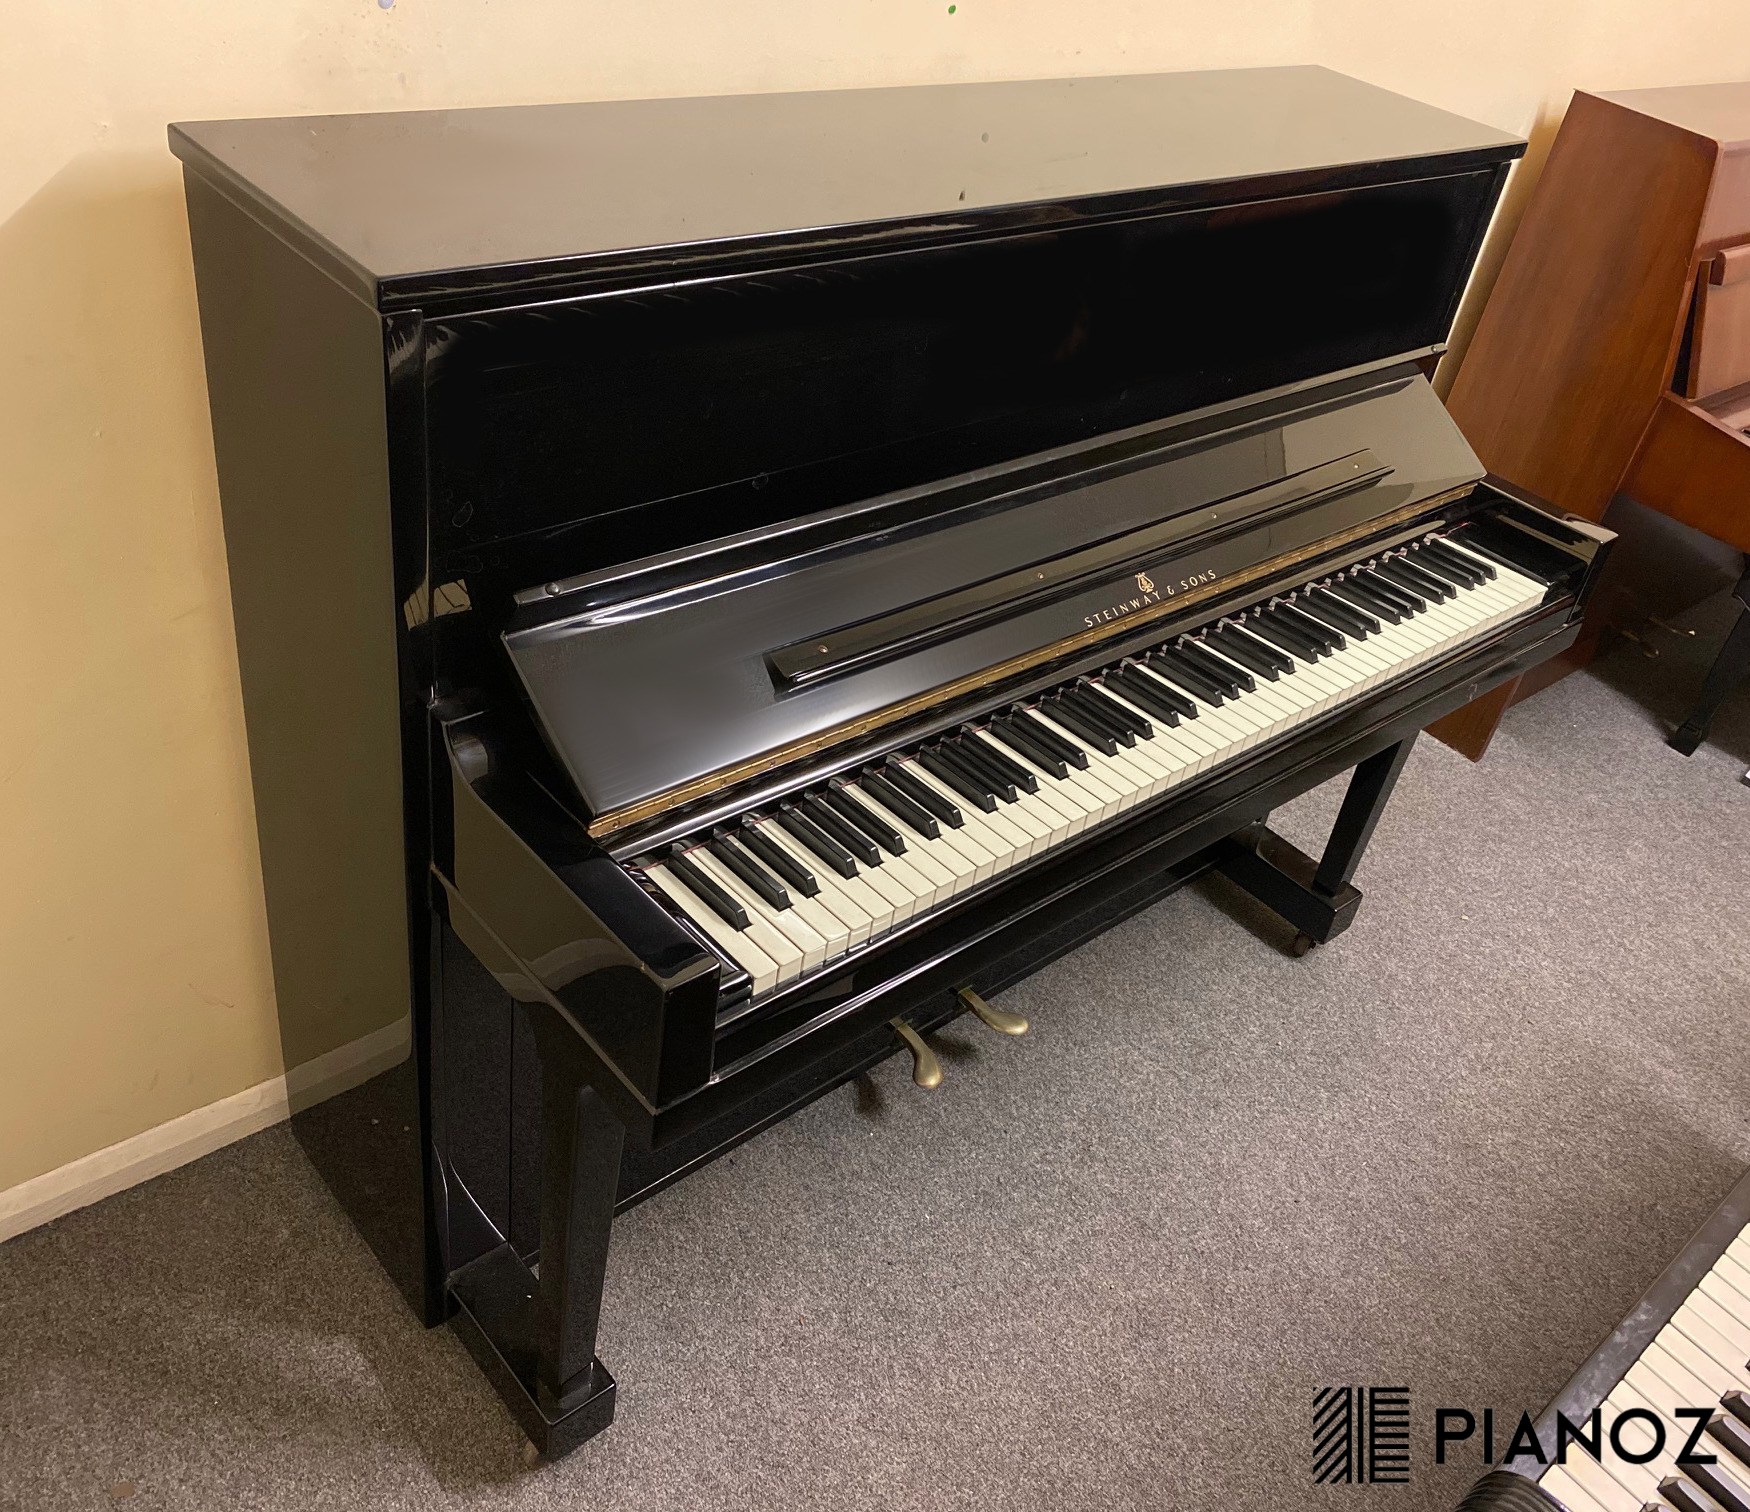 Steinway & Sons Type 45 Upright Piano piano for sale in UK